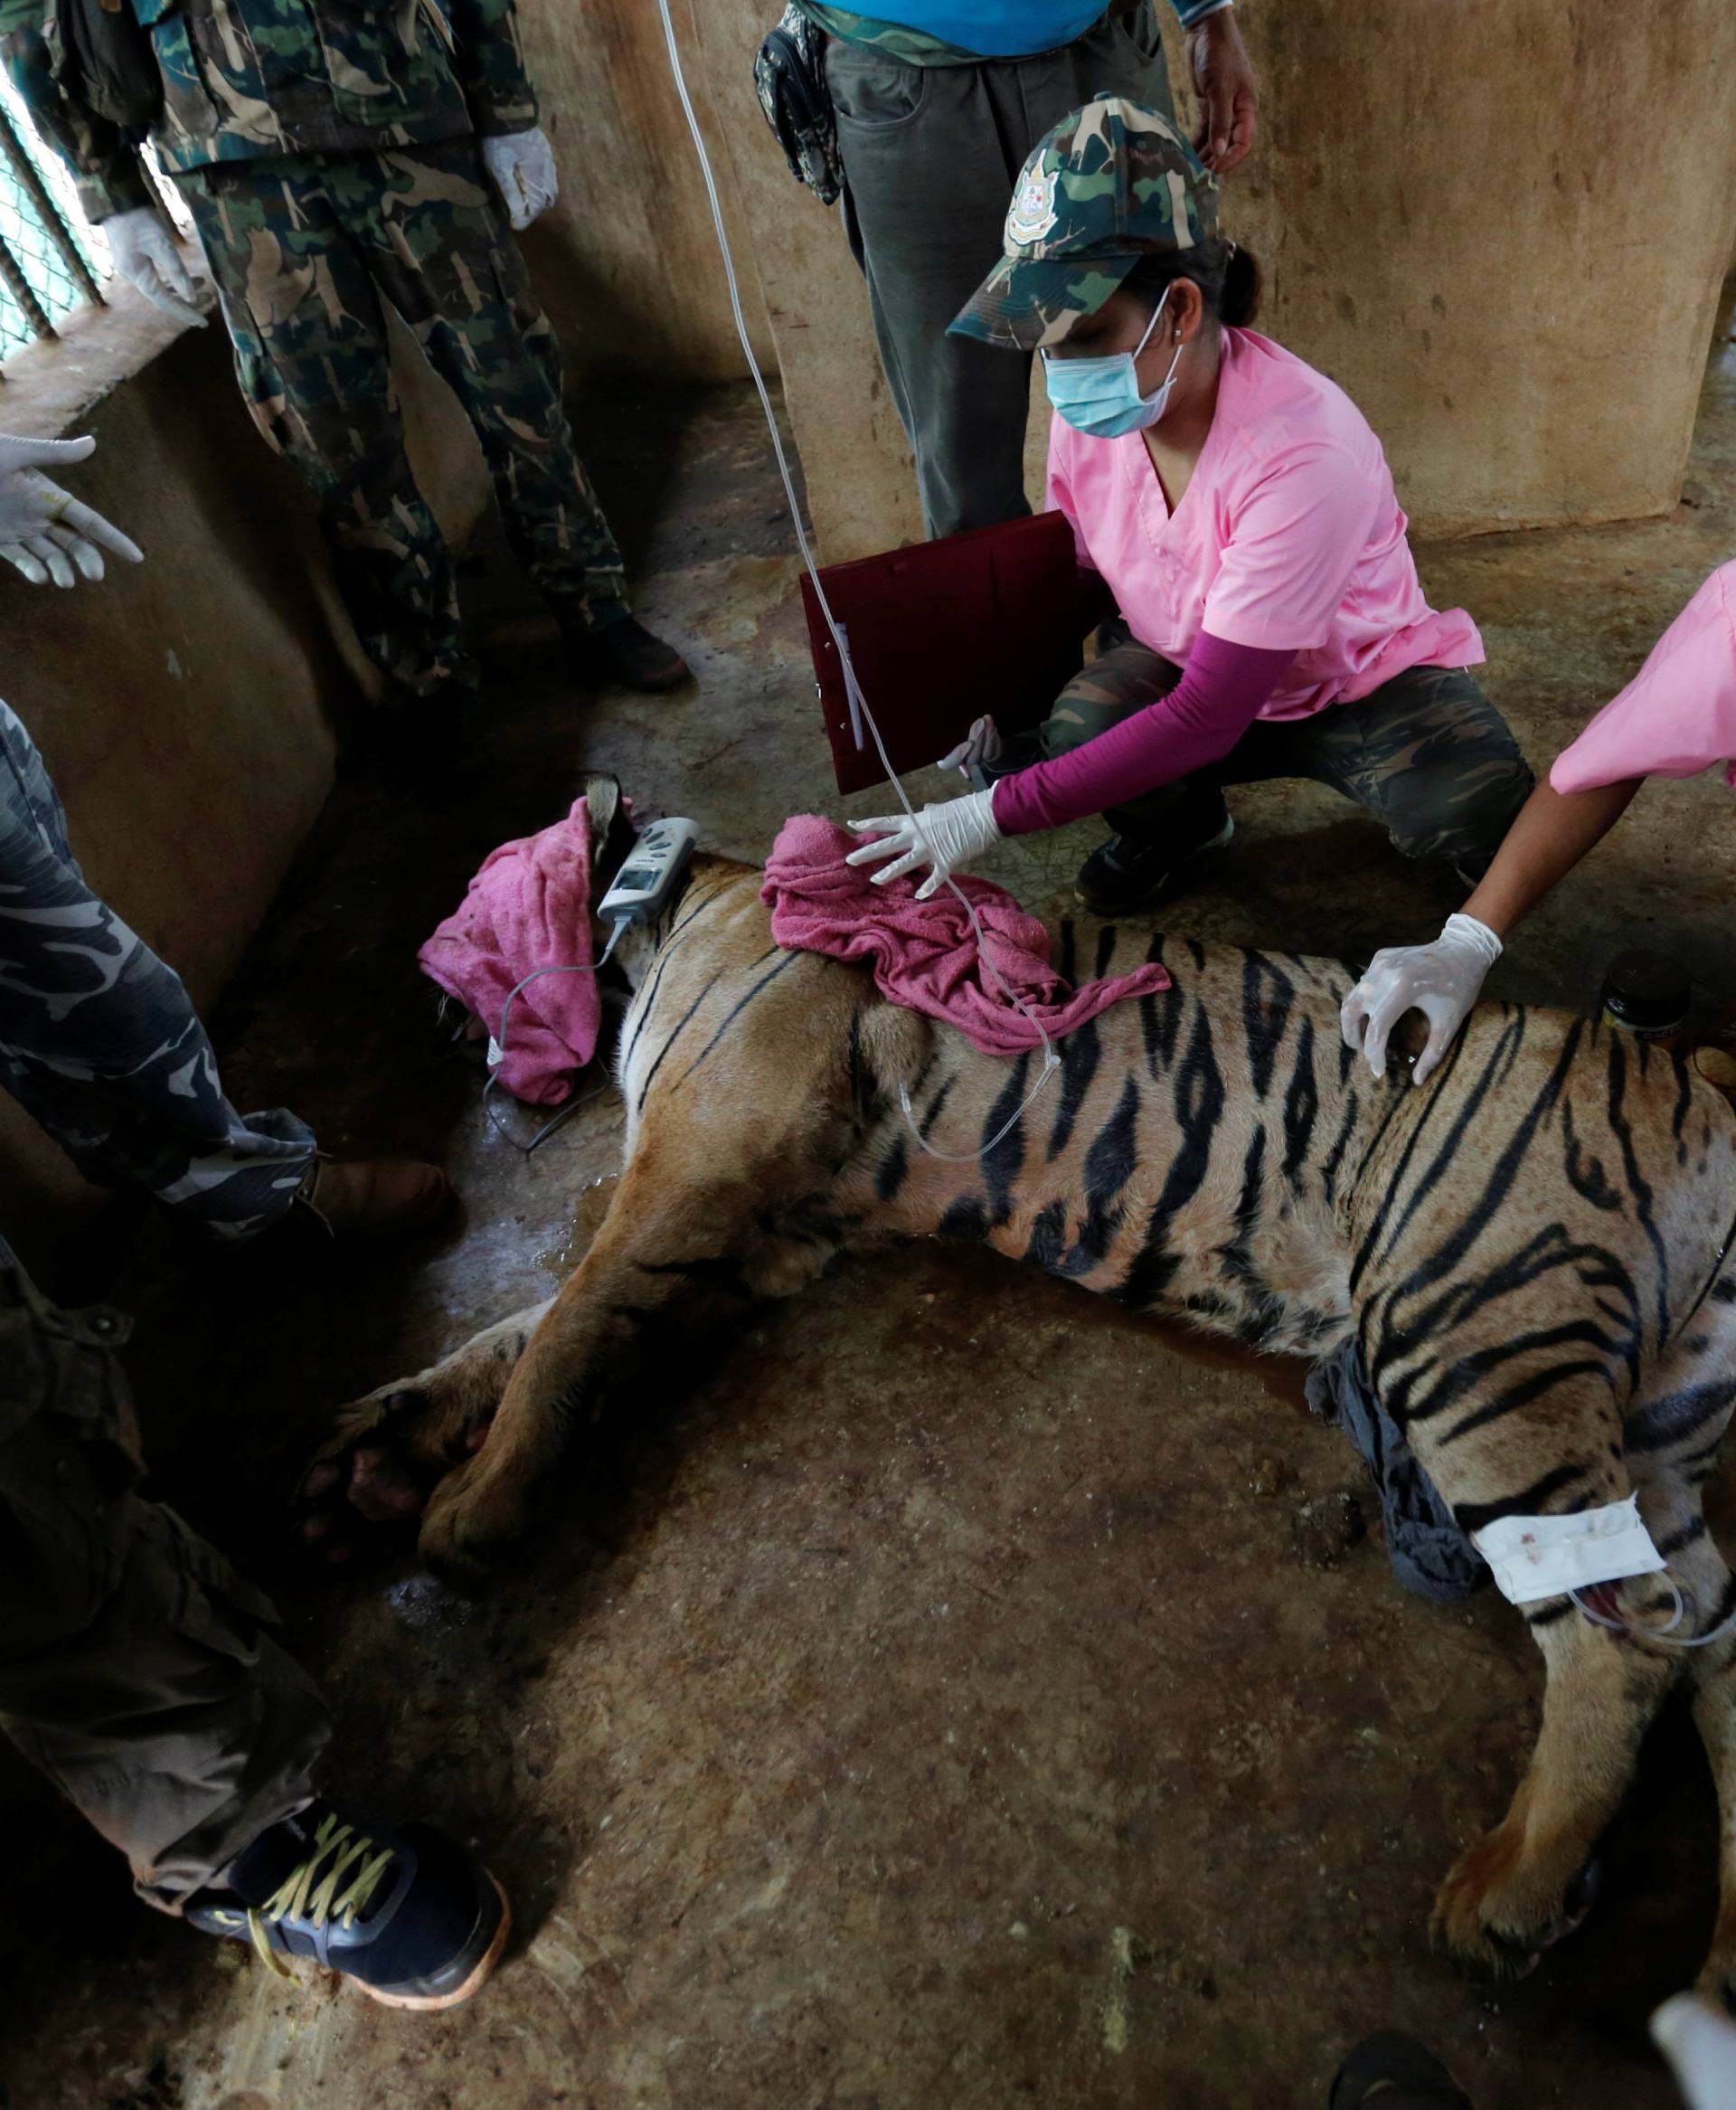 A sedated tiger is seen in an enclosure as officials continue moving live tigers from the controversial Tiger Temple, in Kanchanaburi province, west of Bangkok